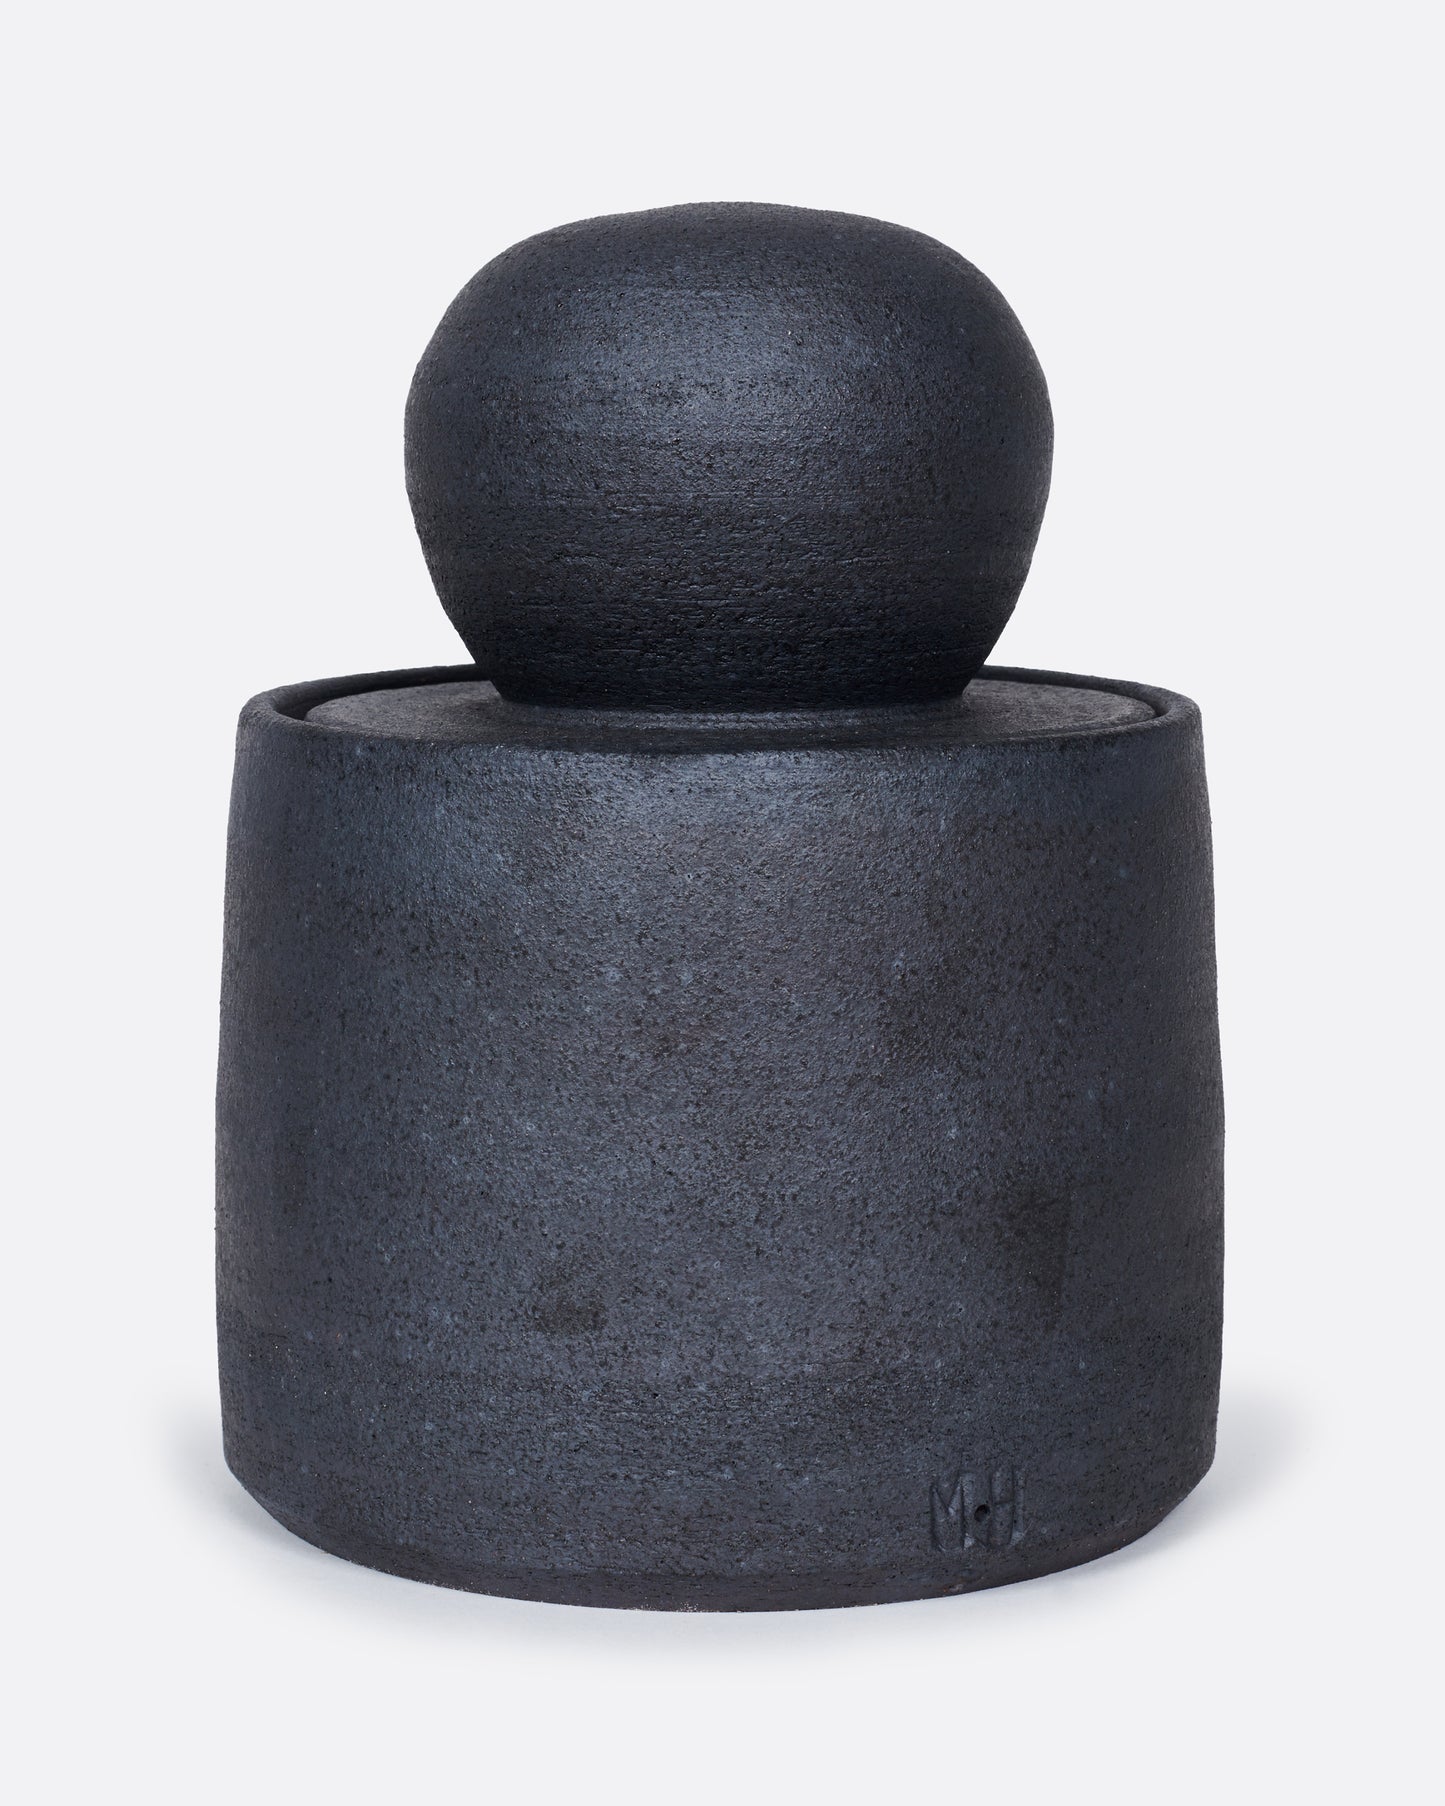 A black jar with a globe lid, shown from the front.